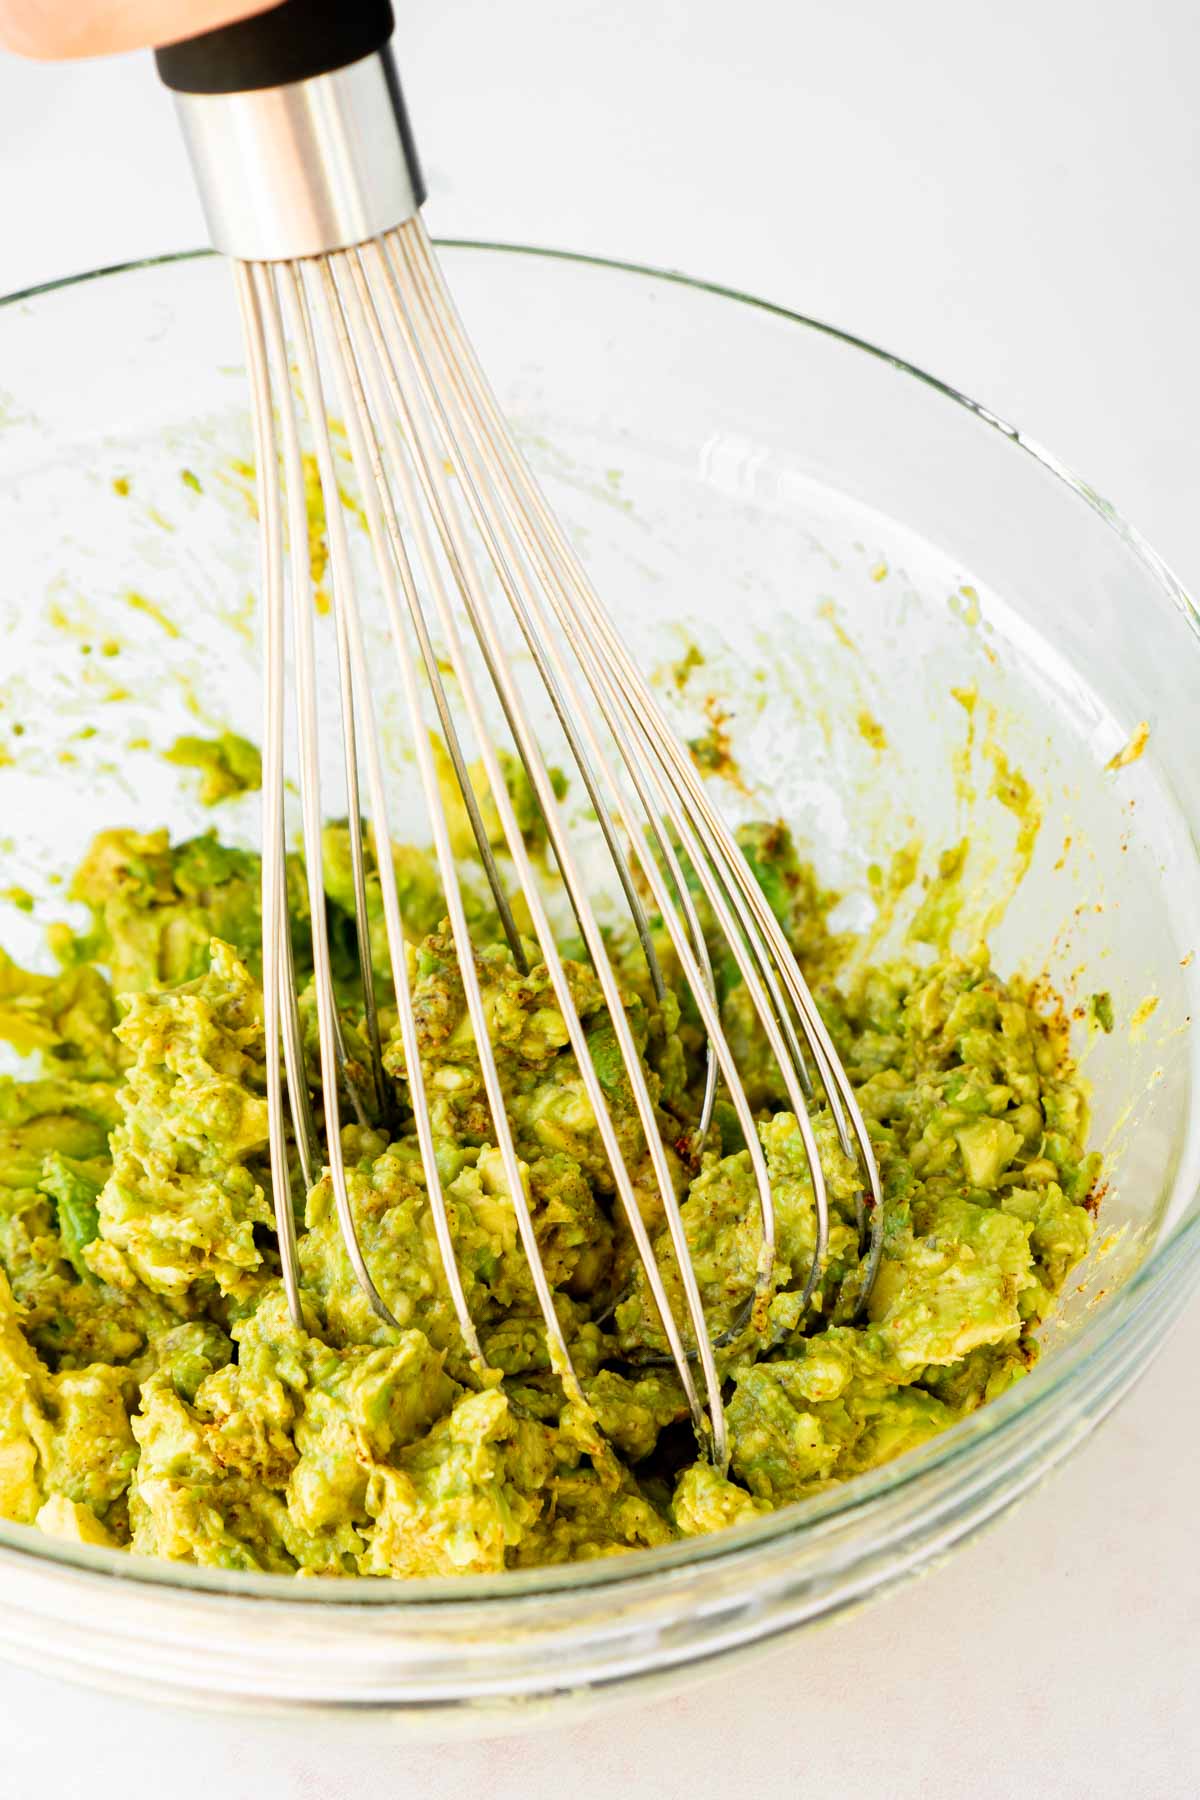 Avocado being mashed with a whisk